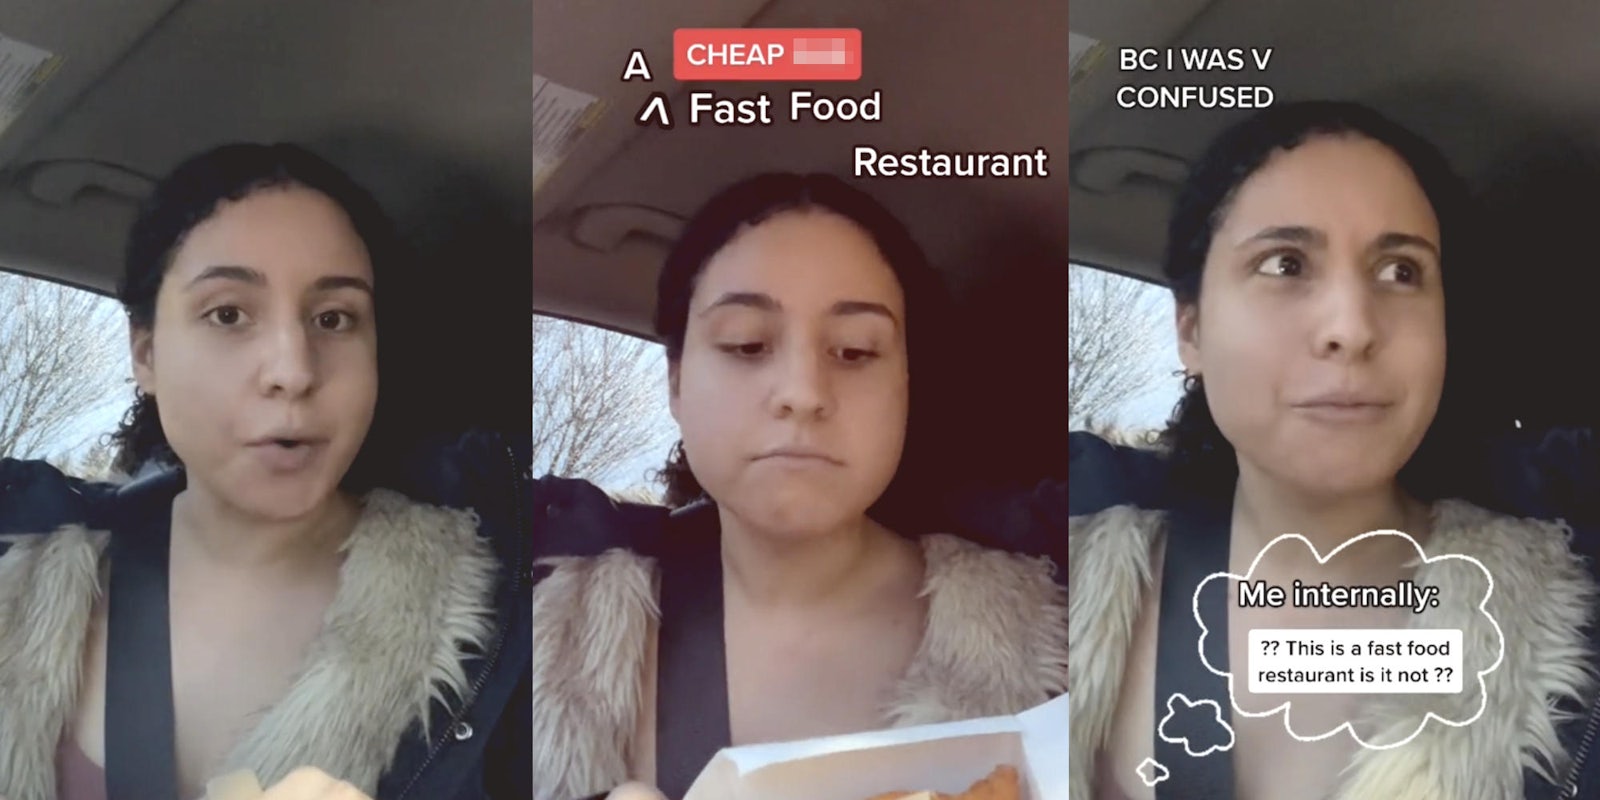 three photos of a woman holding fast food and making confused expressions